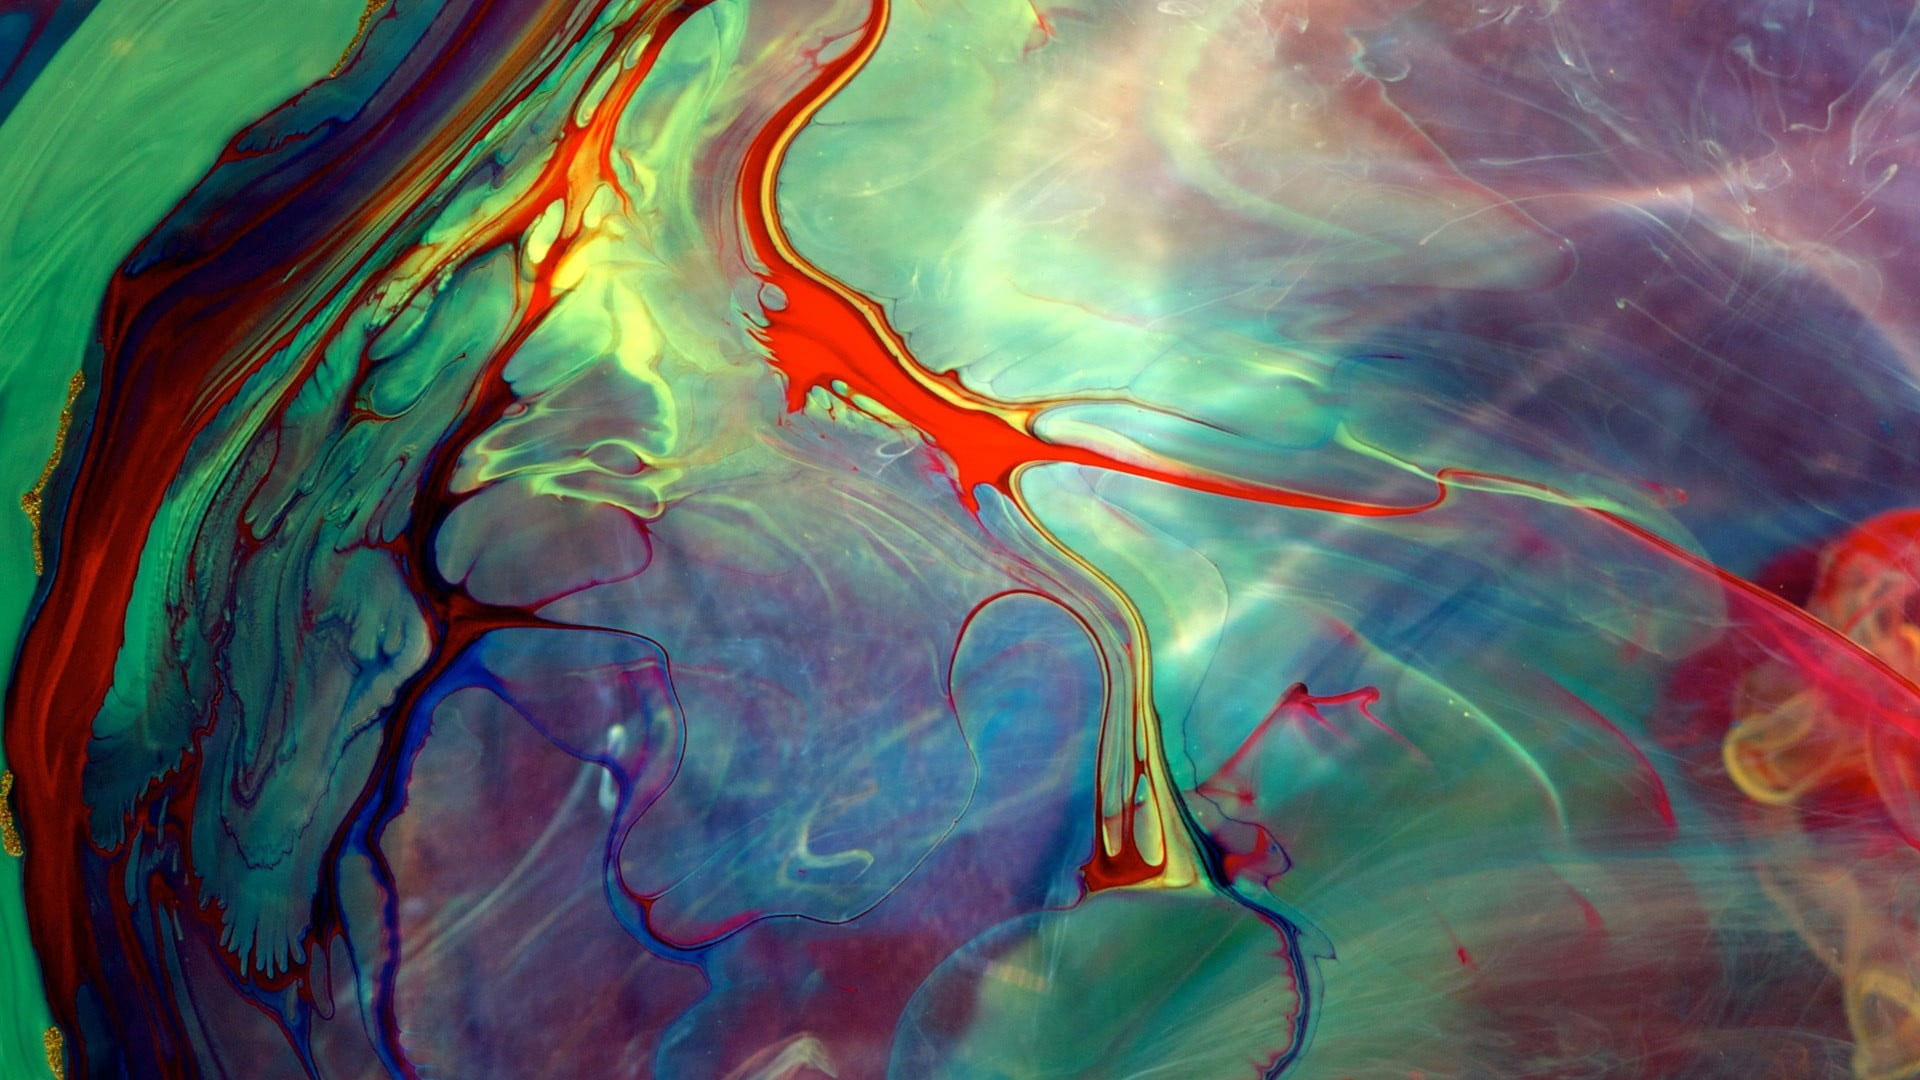 Multicolored fluid abstract painting wallpaper, paint in water, streaks